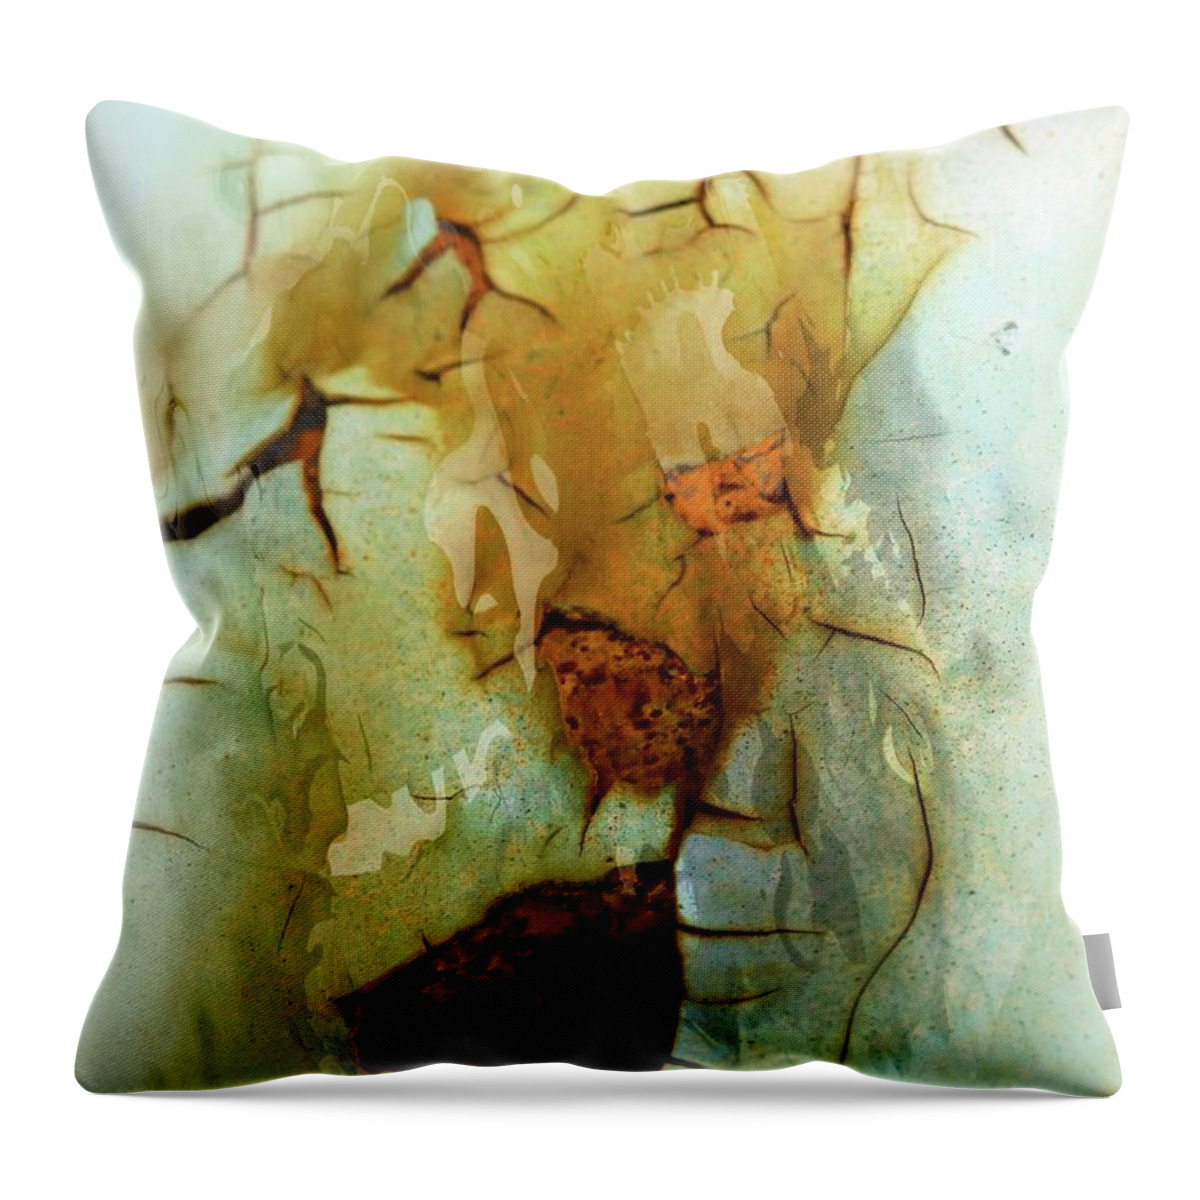 Marcia Lee Jones Throw Pillow featuring the photograph Cracks On The Surface by Marcia Lee Jones